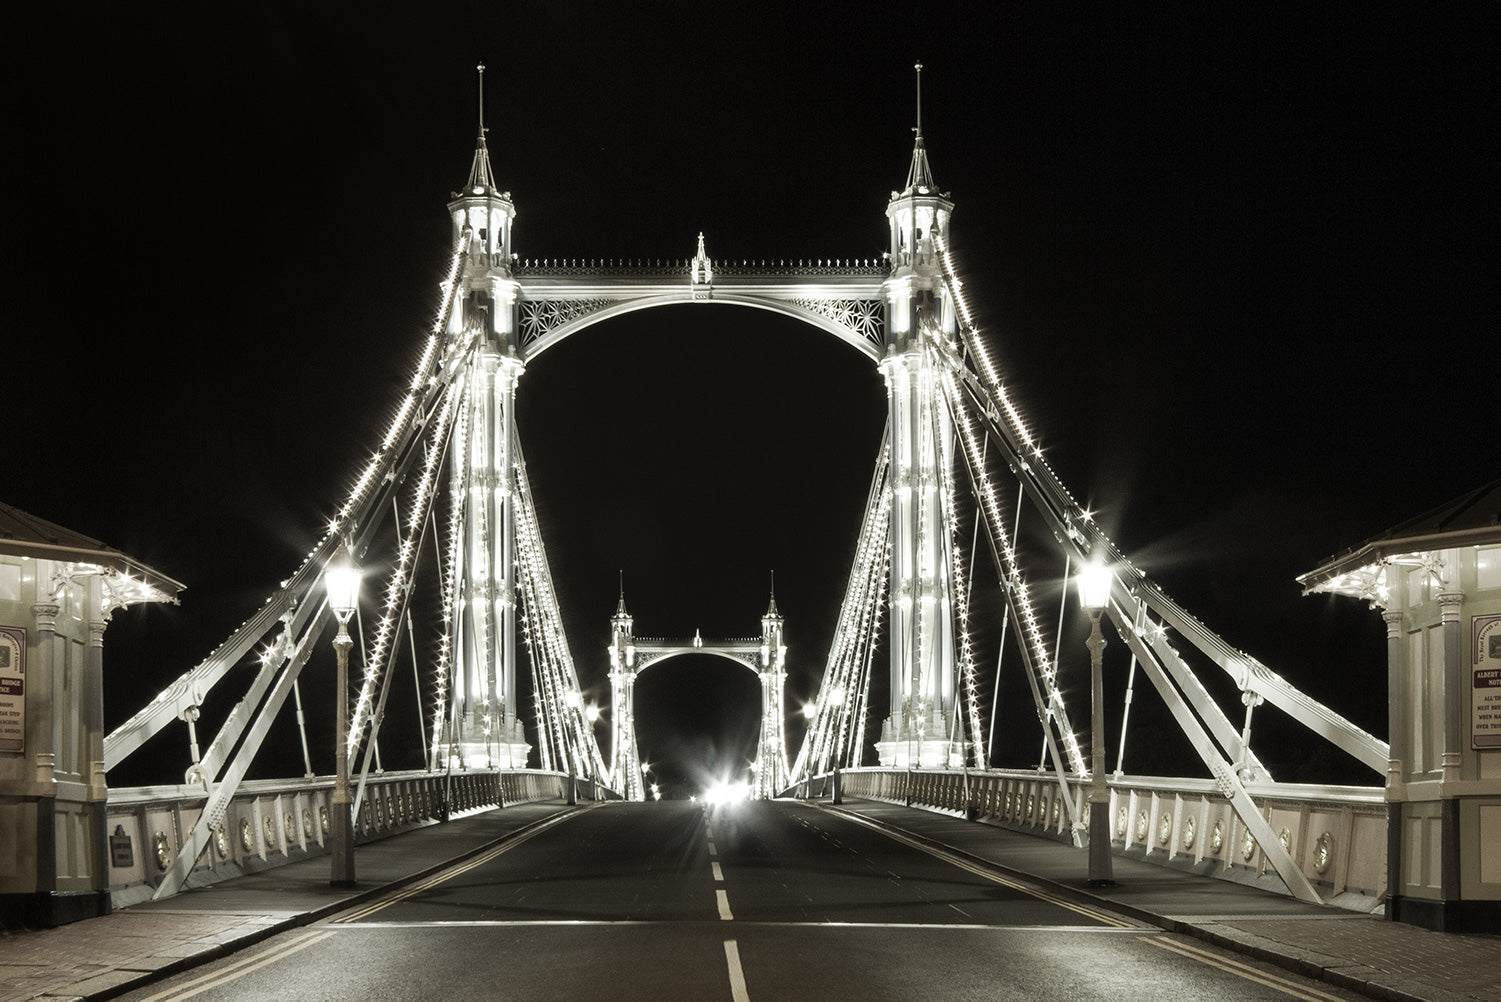 Black and white view of the fairy tale like Victorian Albert Bridge in London, lit up at night by 4000 LED lights.